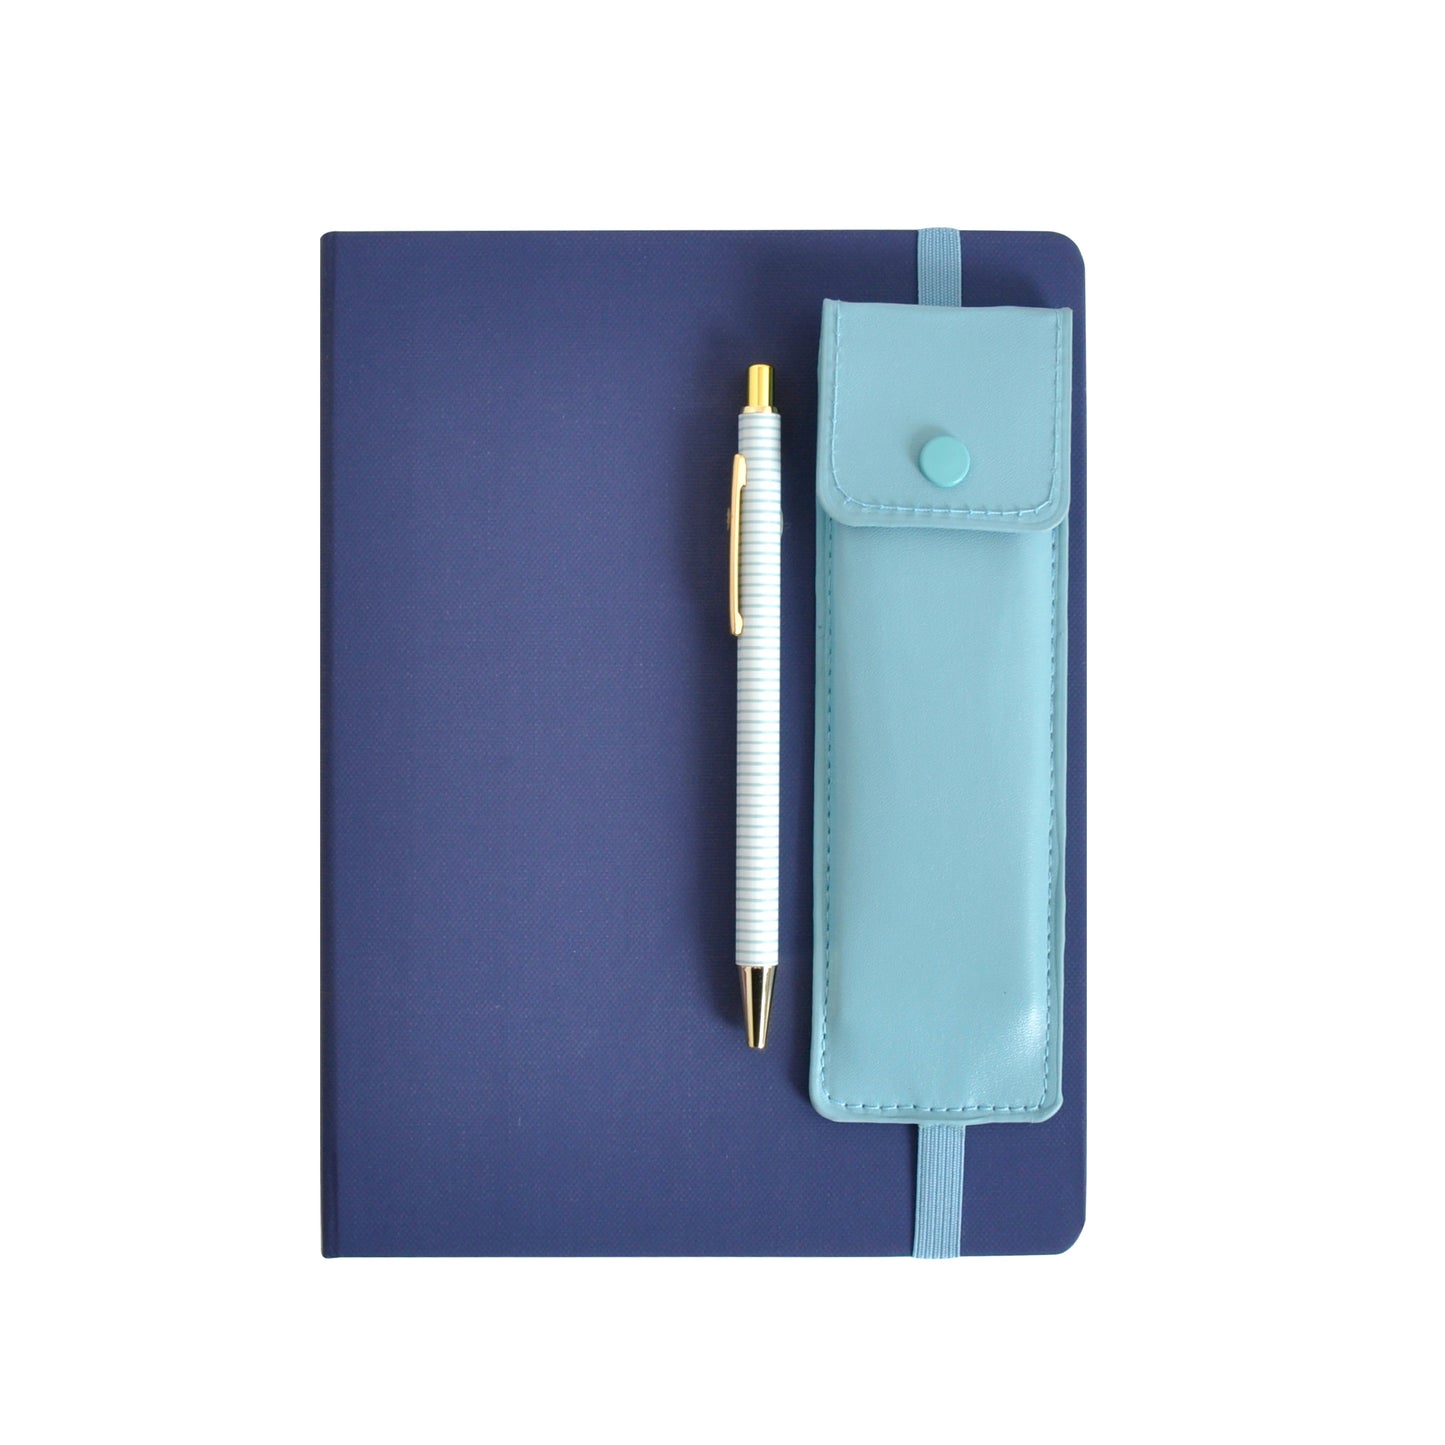 Notebook With Pouch & Pen - Navy